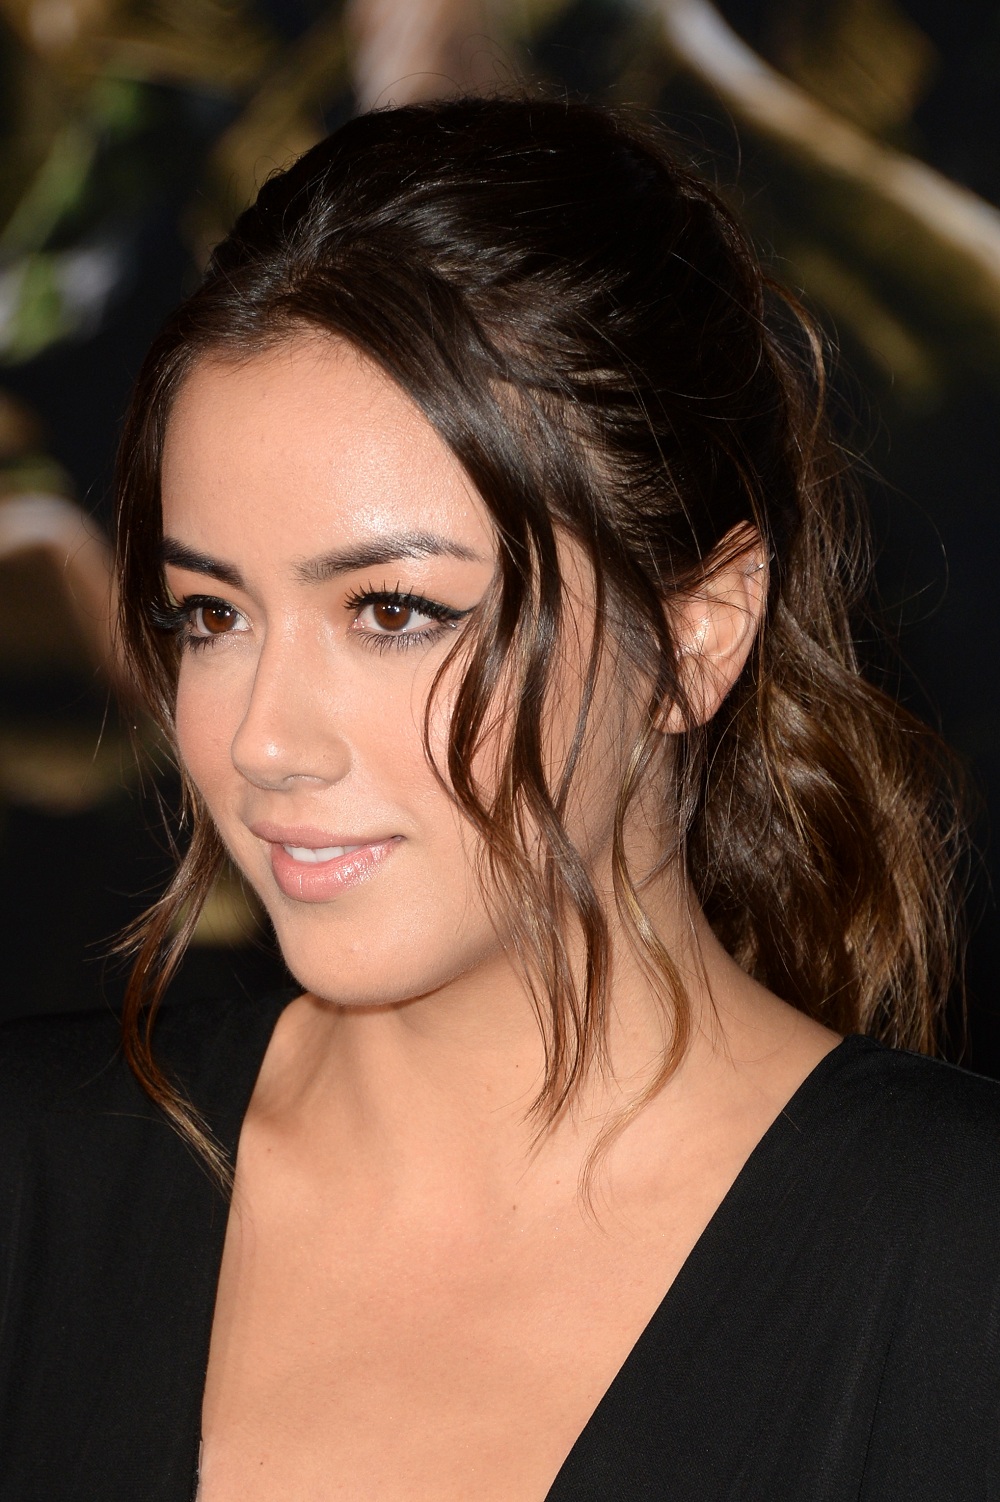 Chloe Bennet Agents of SHIELD Actress Promo Photoshoot Wallpapers